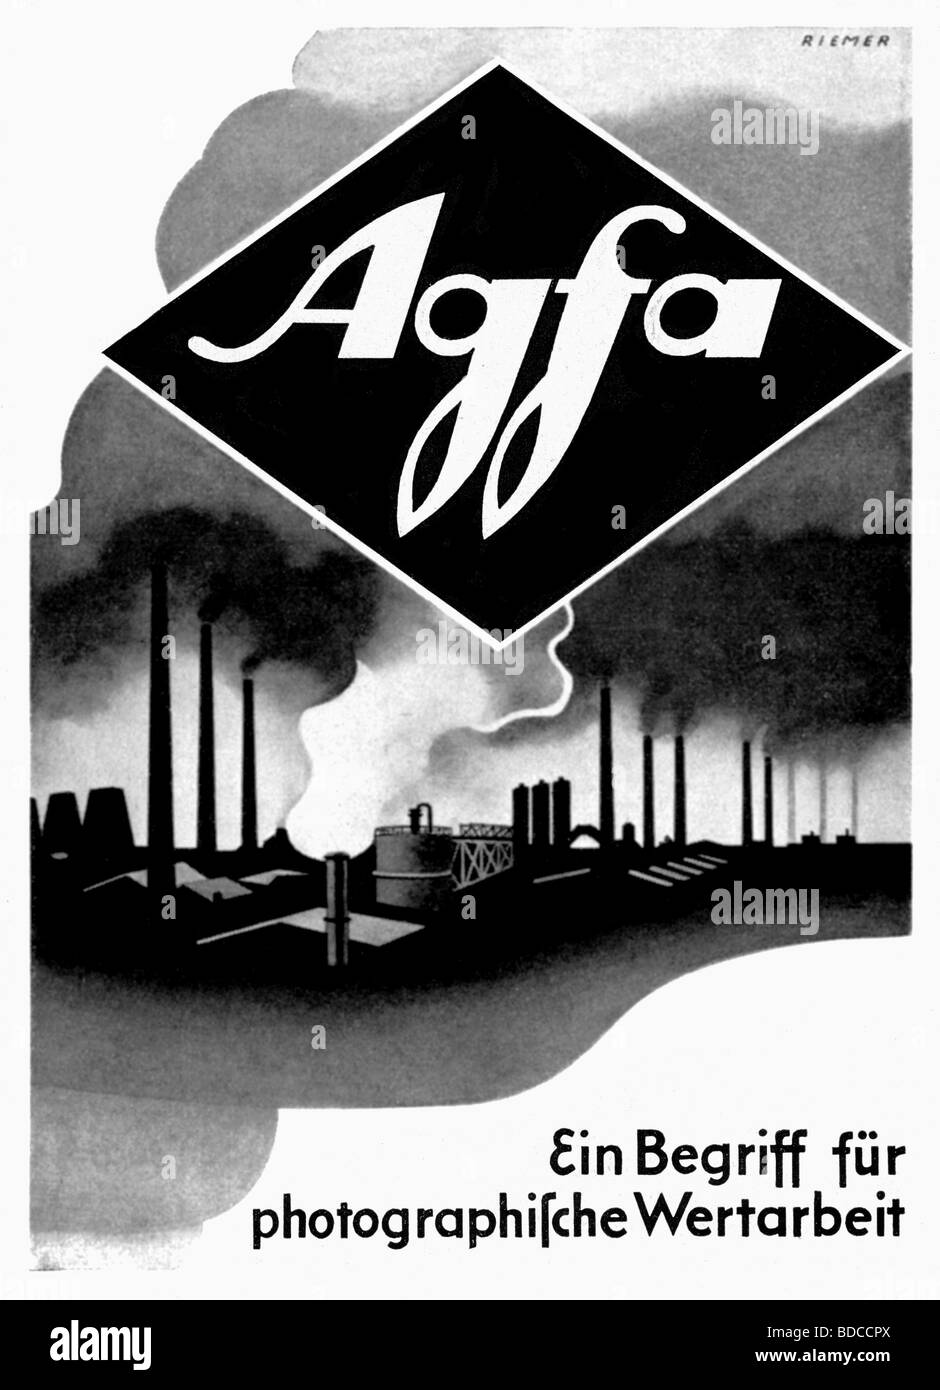 Agfa Y4938 Items Photo Agfa Advertising D'Epoca 1927 Old Advertising 